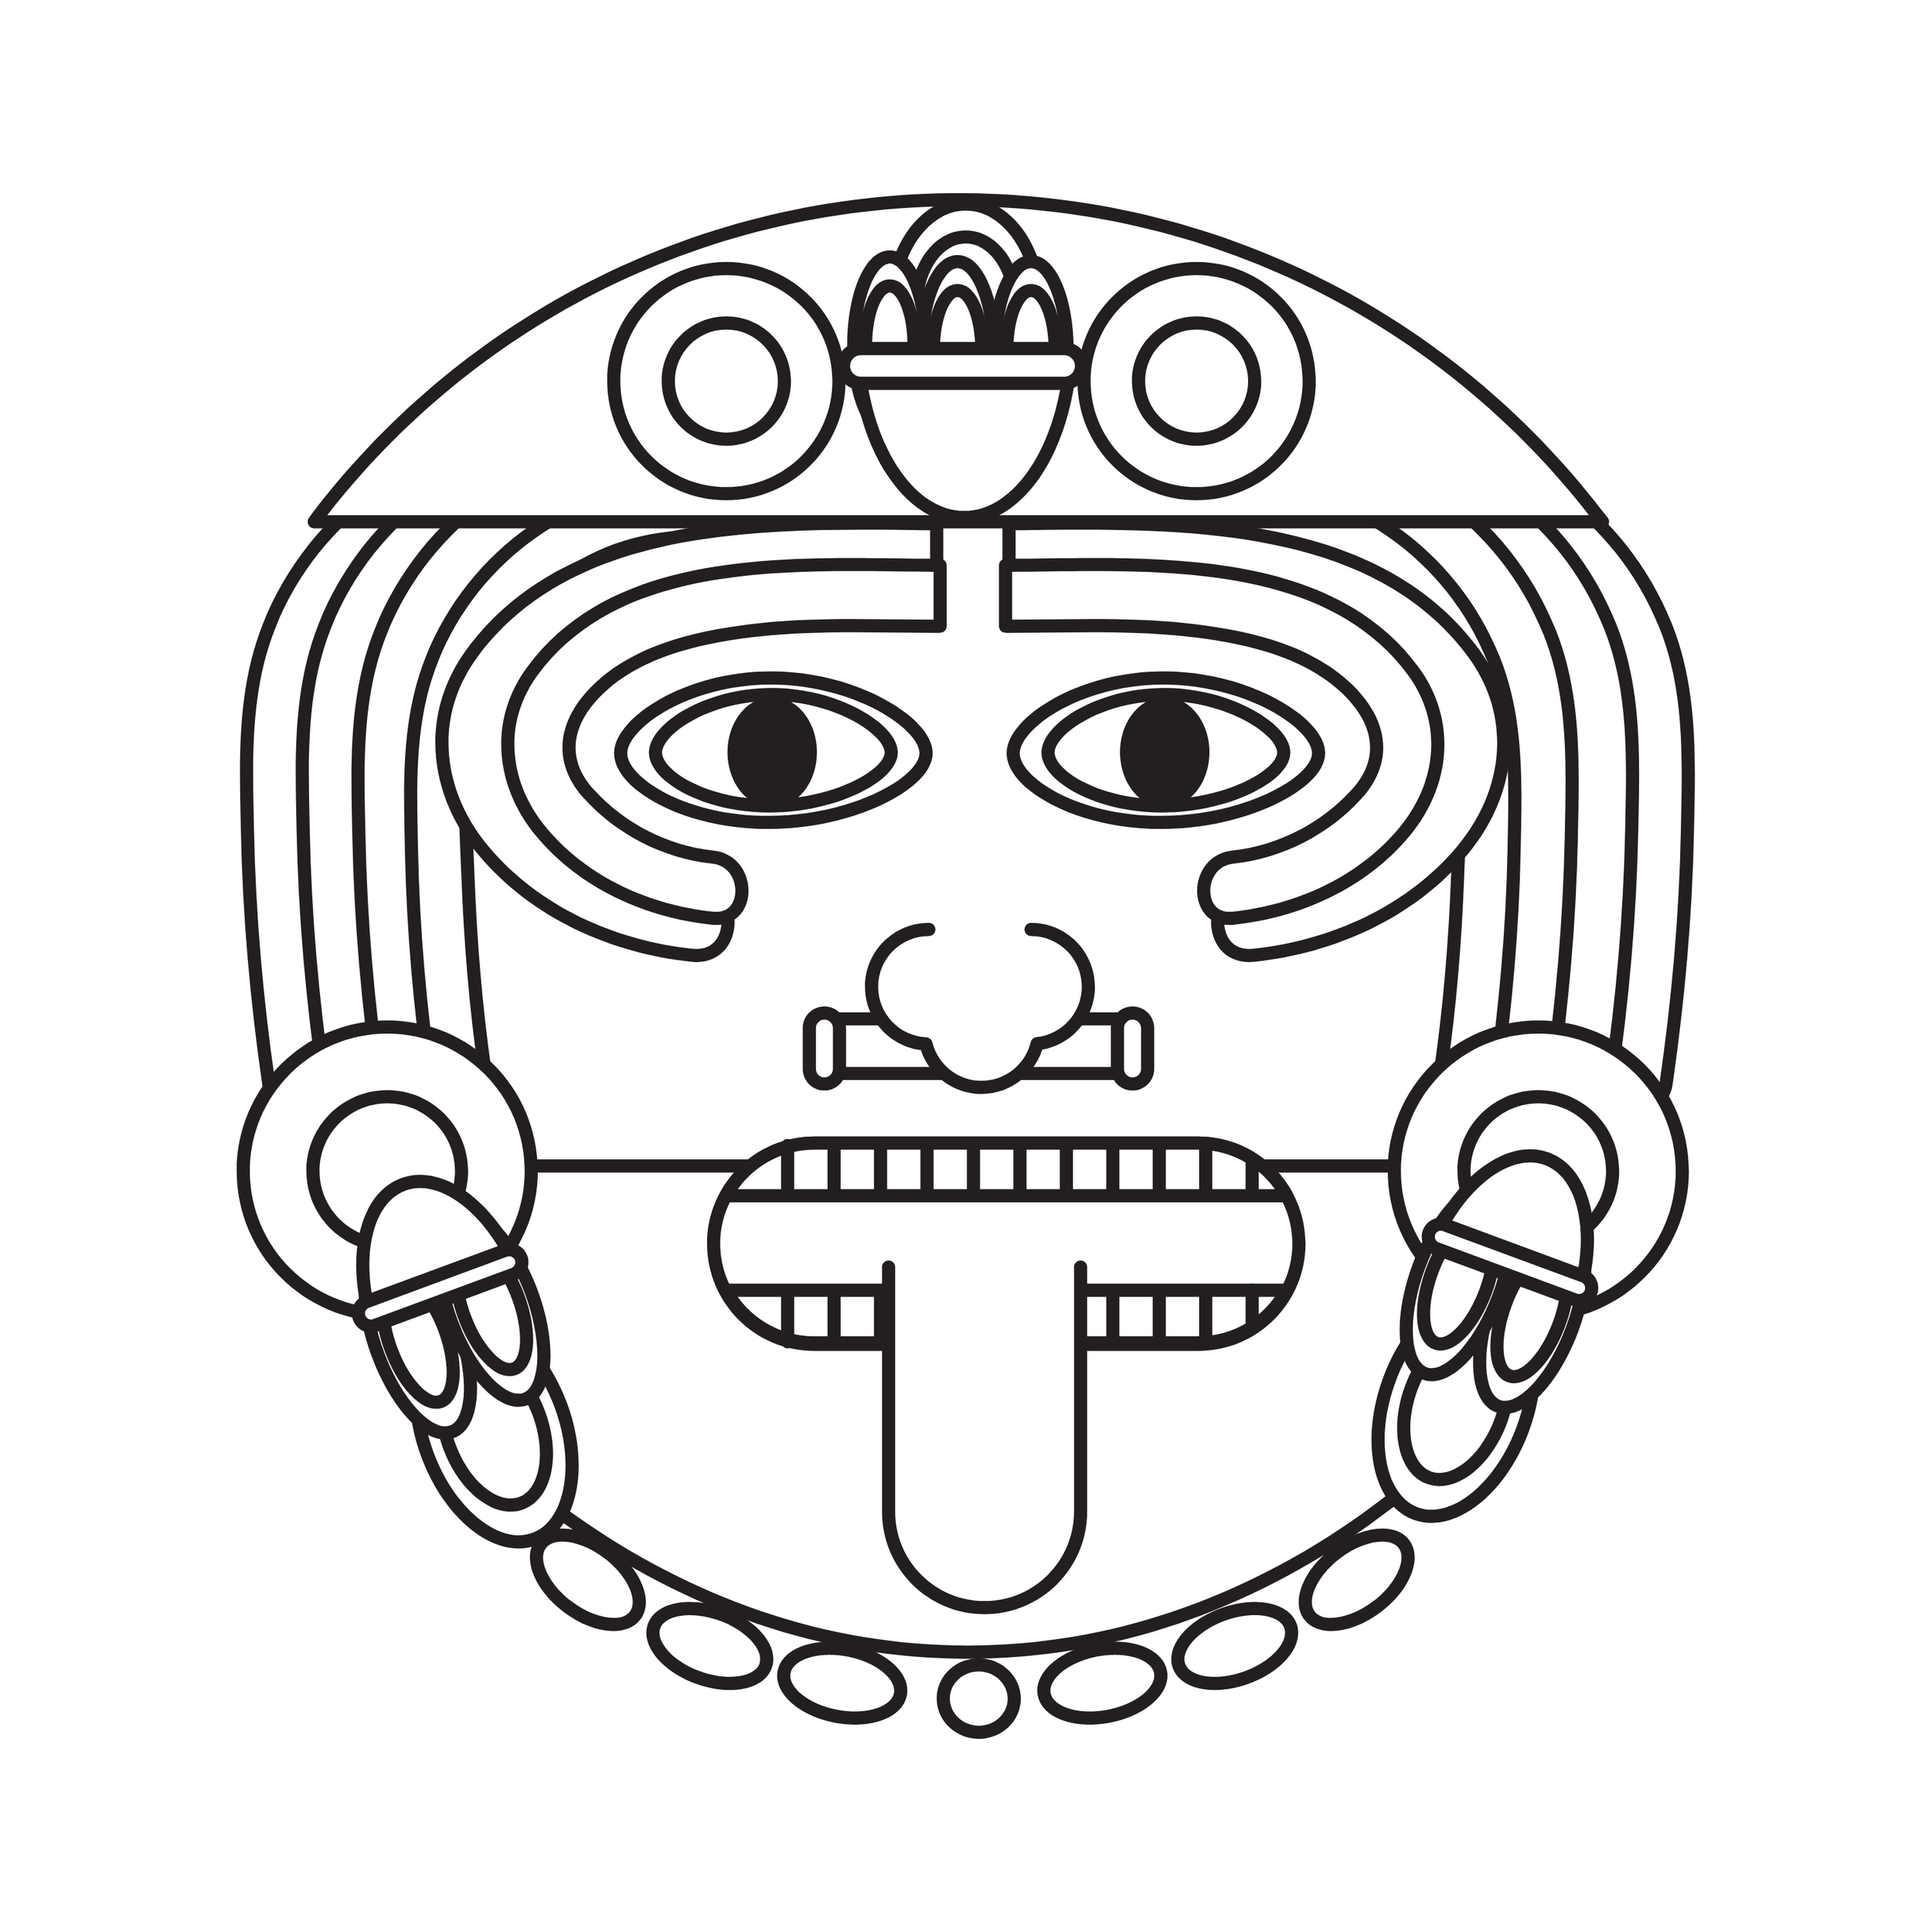 Aztec Tattoos: Flash Images & Meanings — CHELSIDERMY